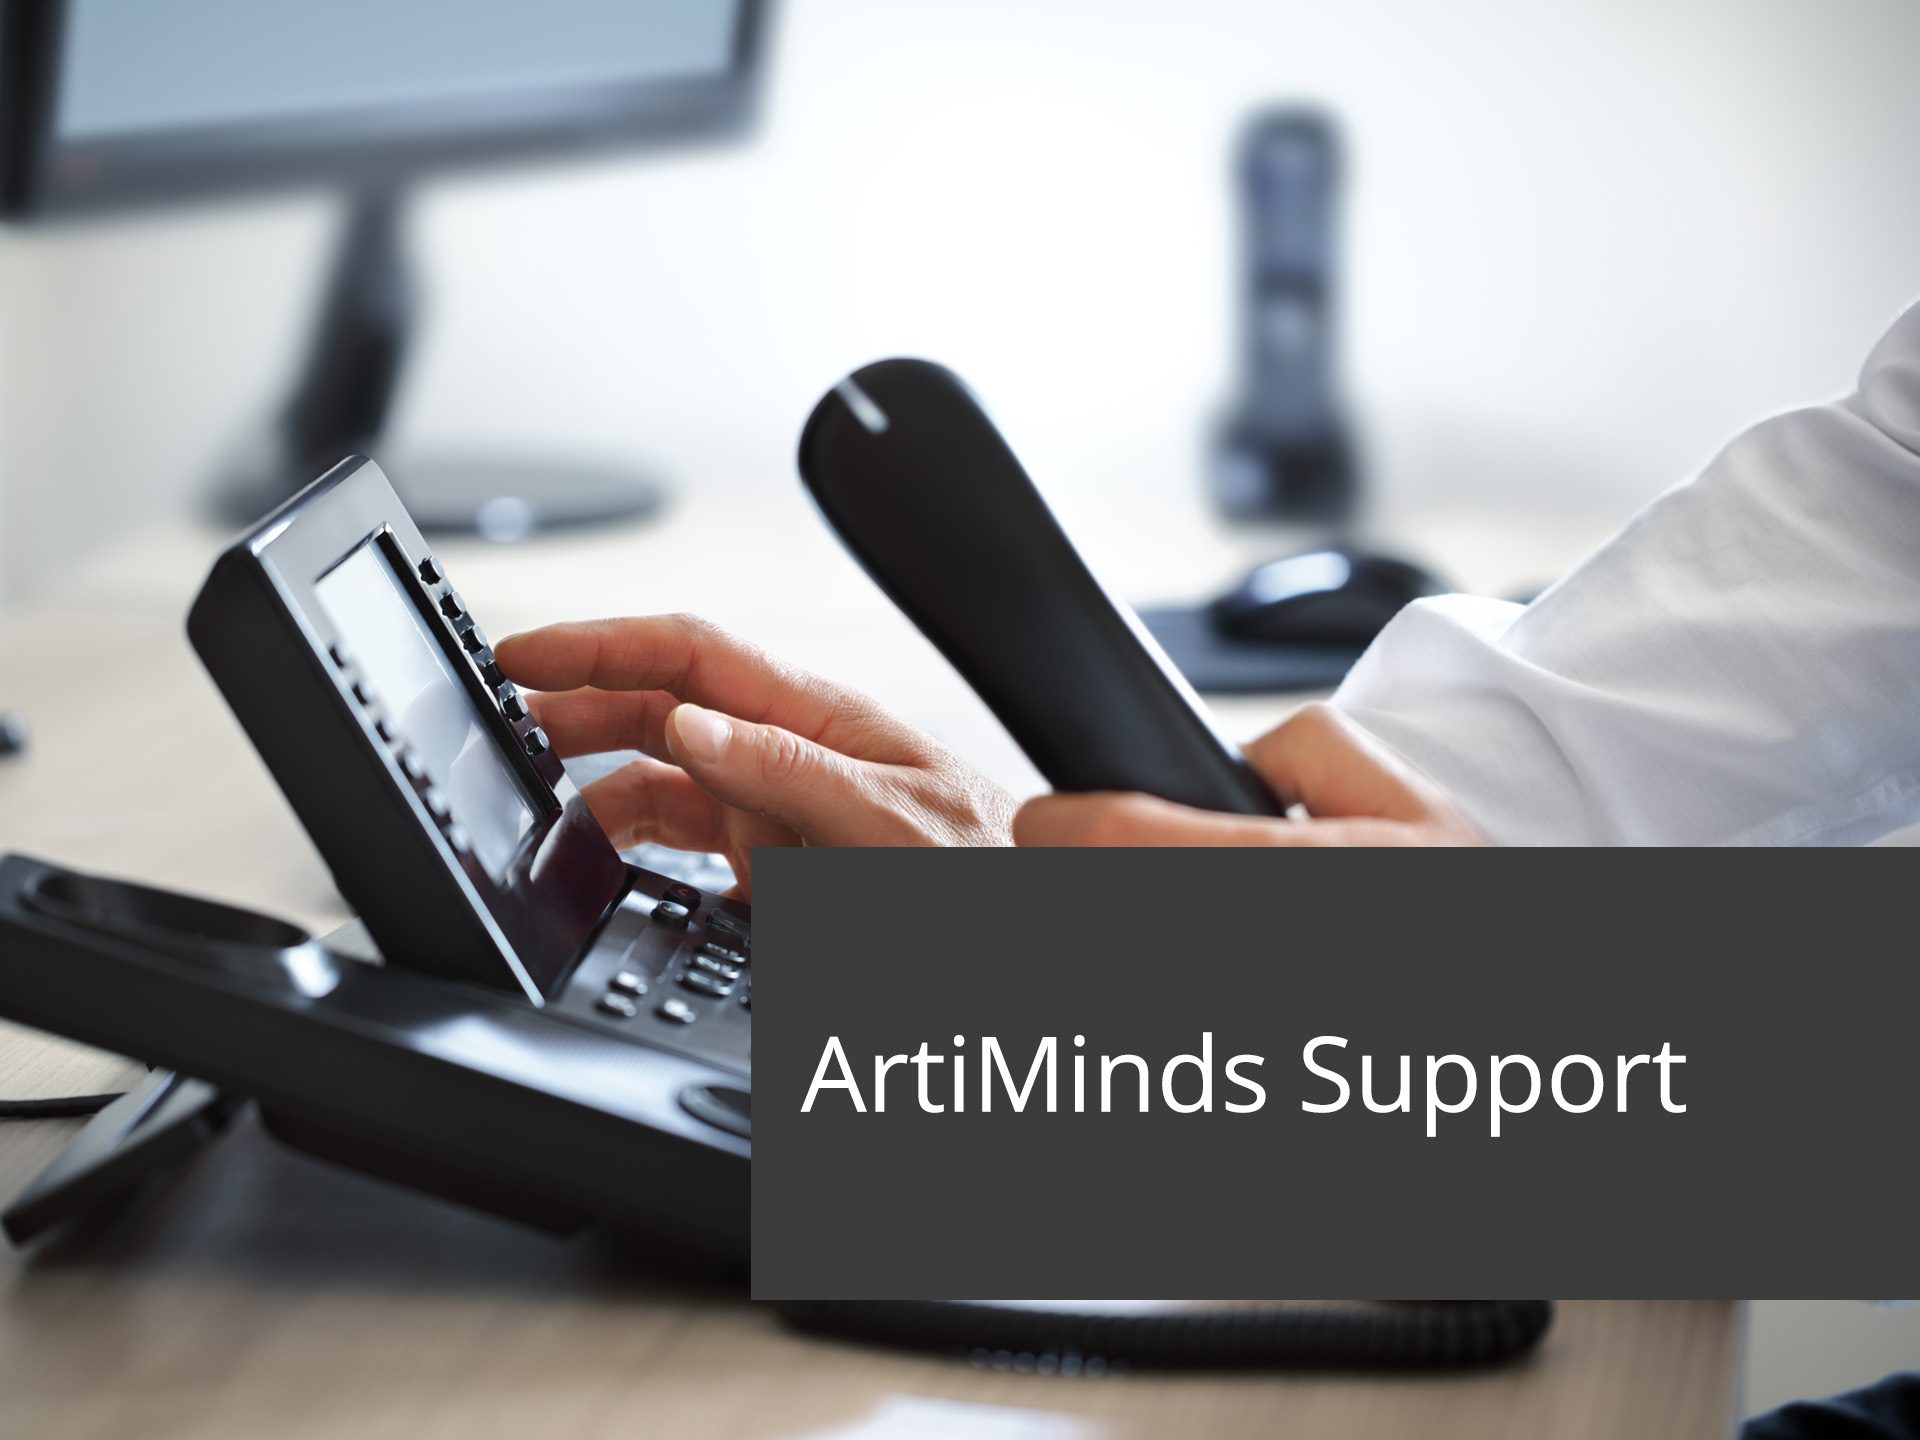 ArtiMinds-Robotics - The ArtiMinds support team is at your side.